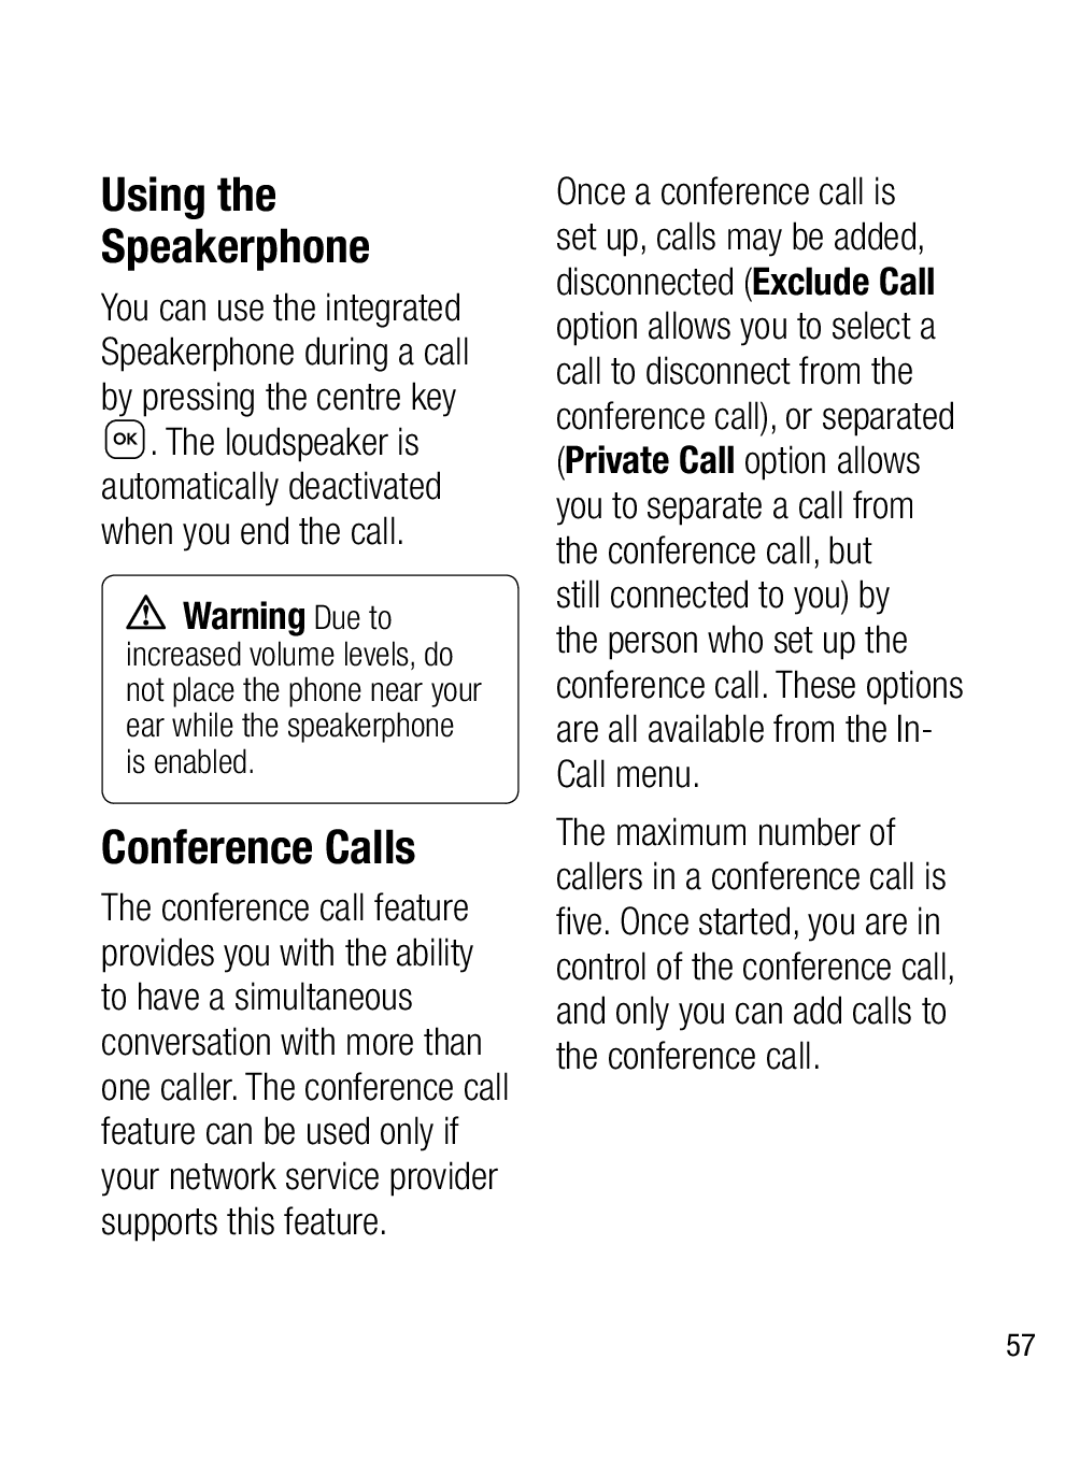 LG Electronics A133CH manual Using the Speakerphone, Conference Calls 